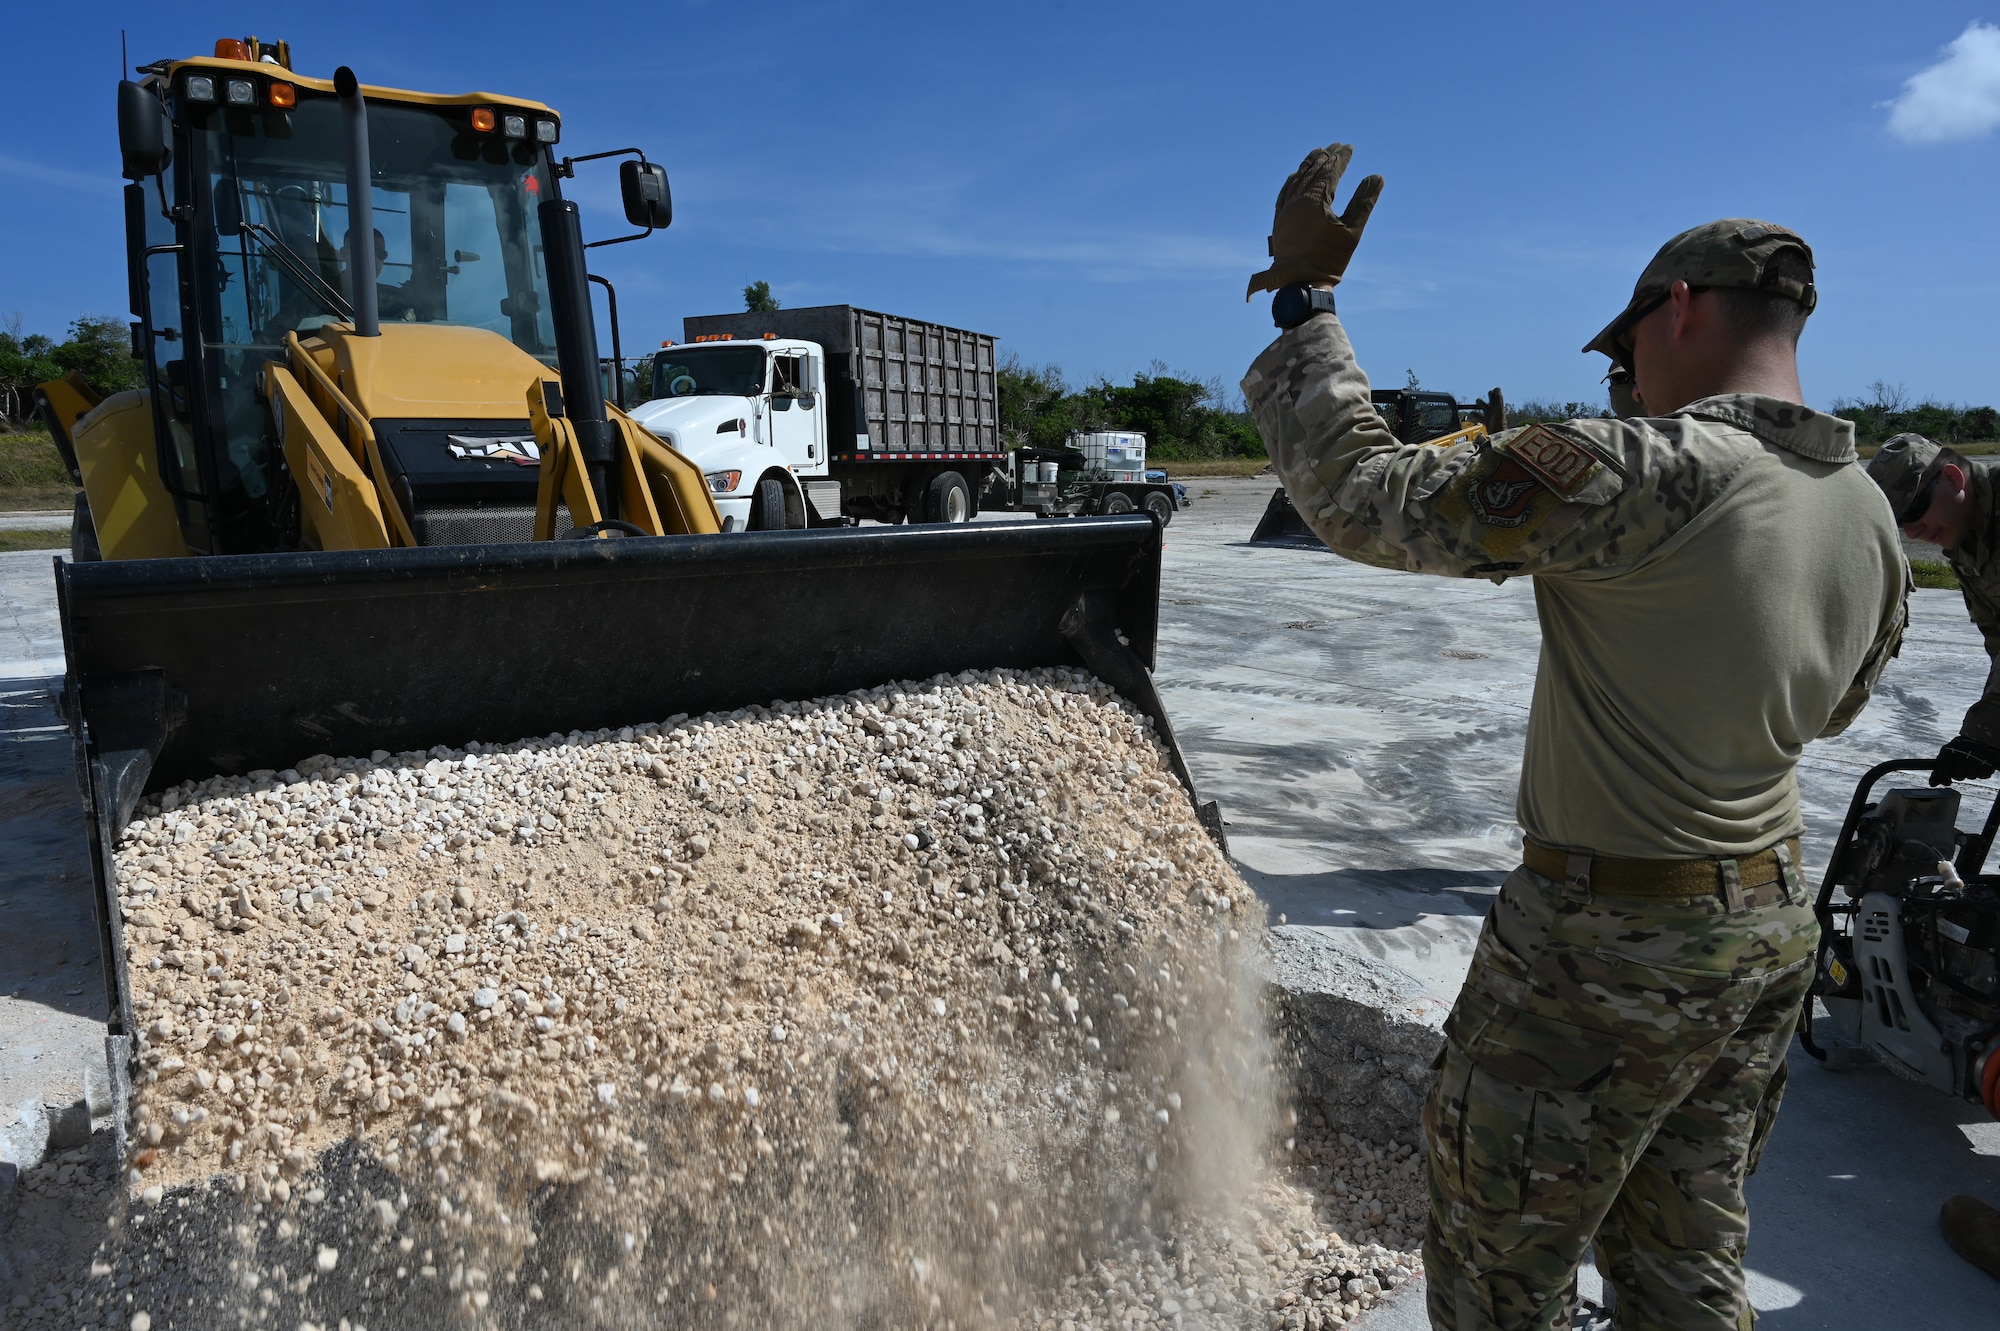 An Airman directs another Airman who is operating a backhoe on disposing crushed stones on a crater.